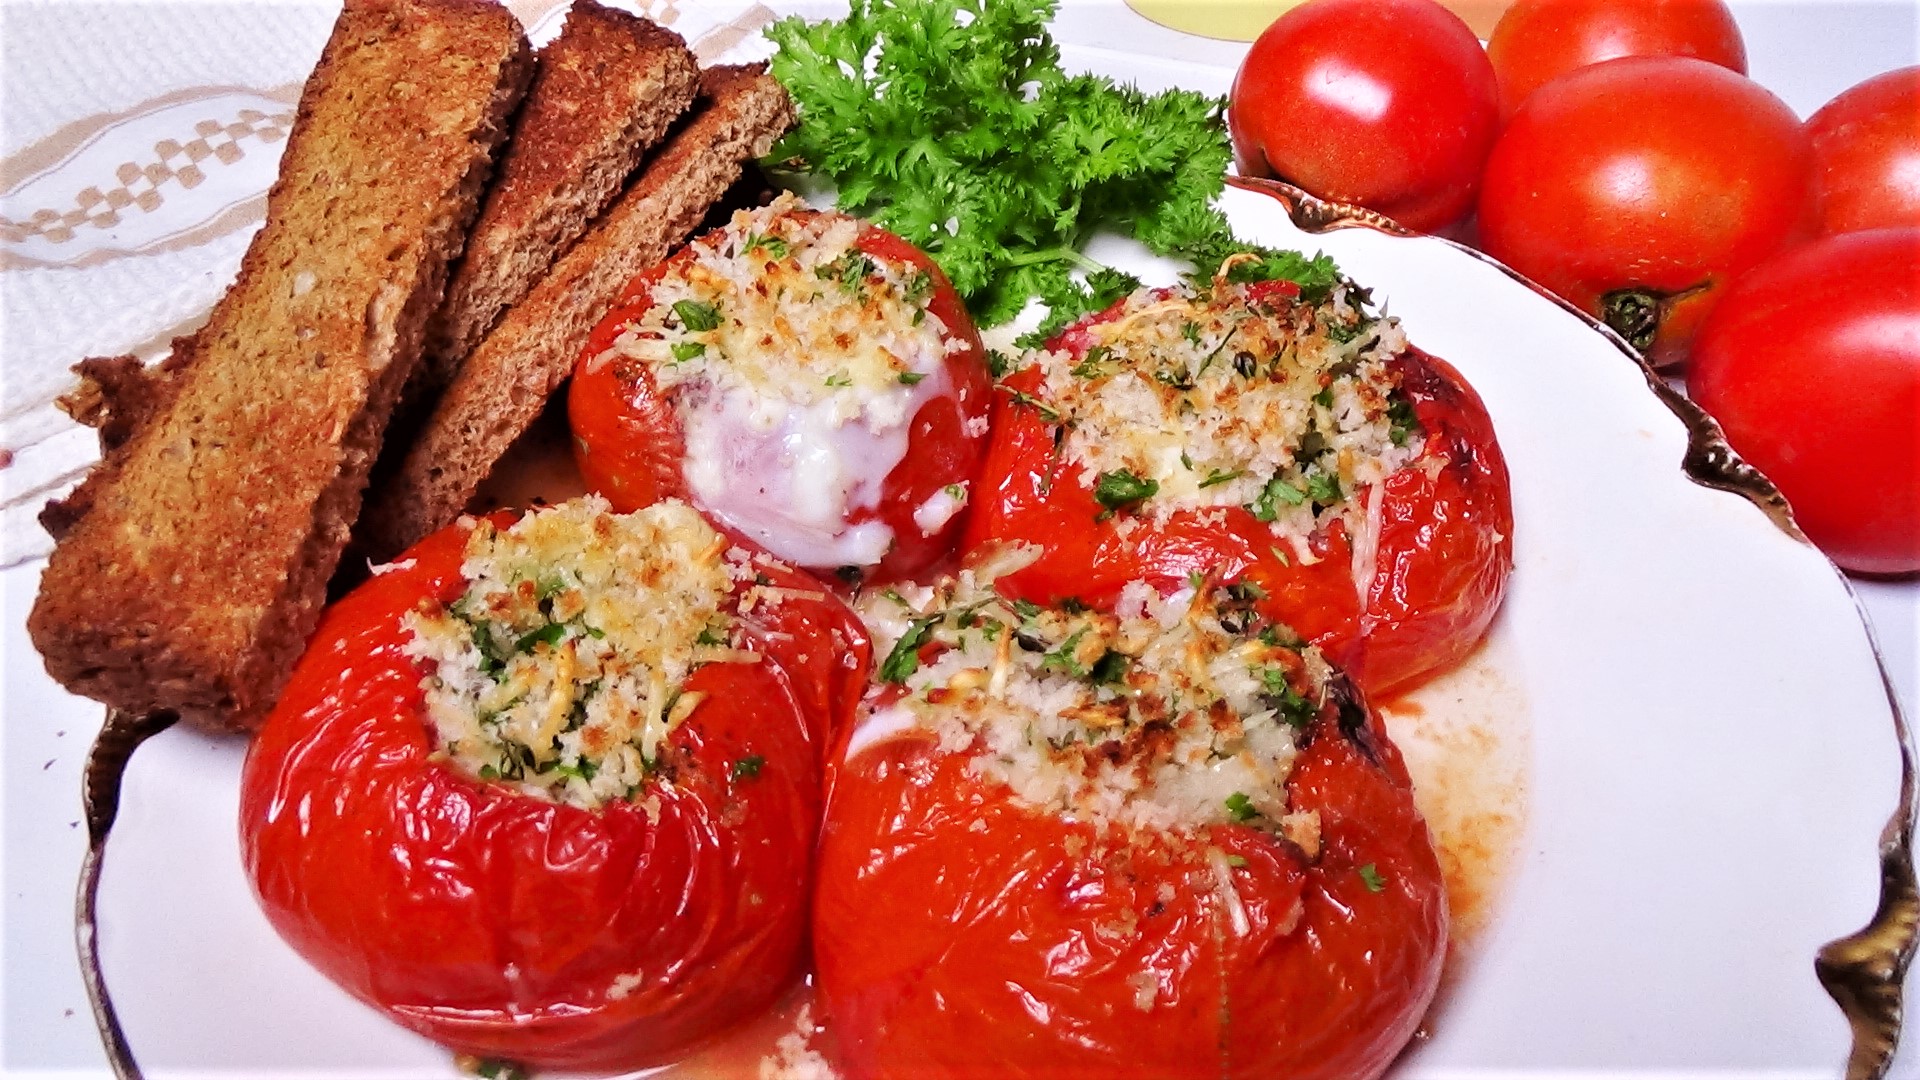 Baked Eggs in Tomatoes with Herbed Topping